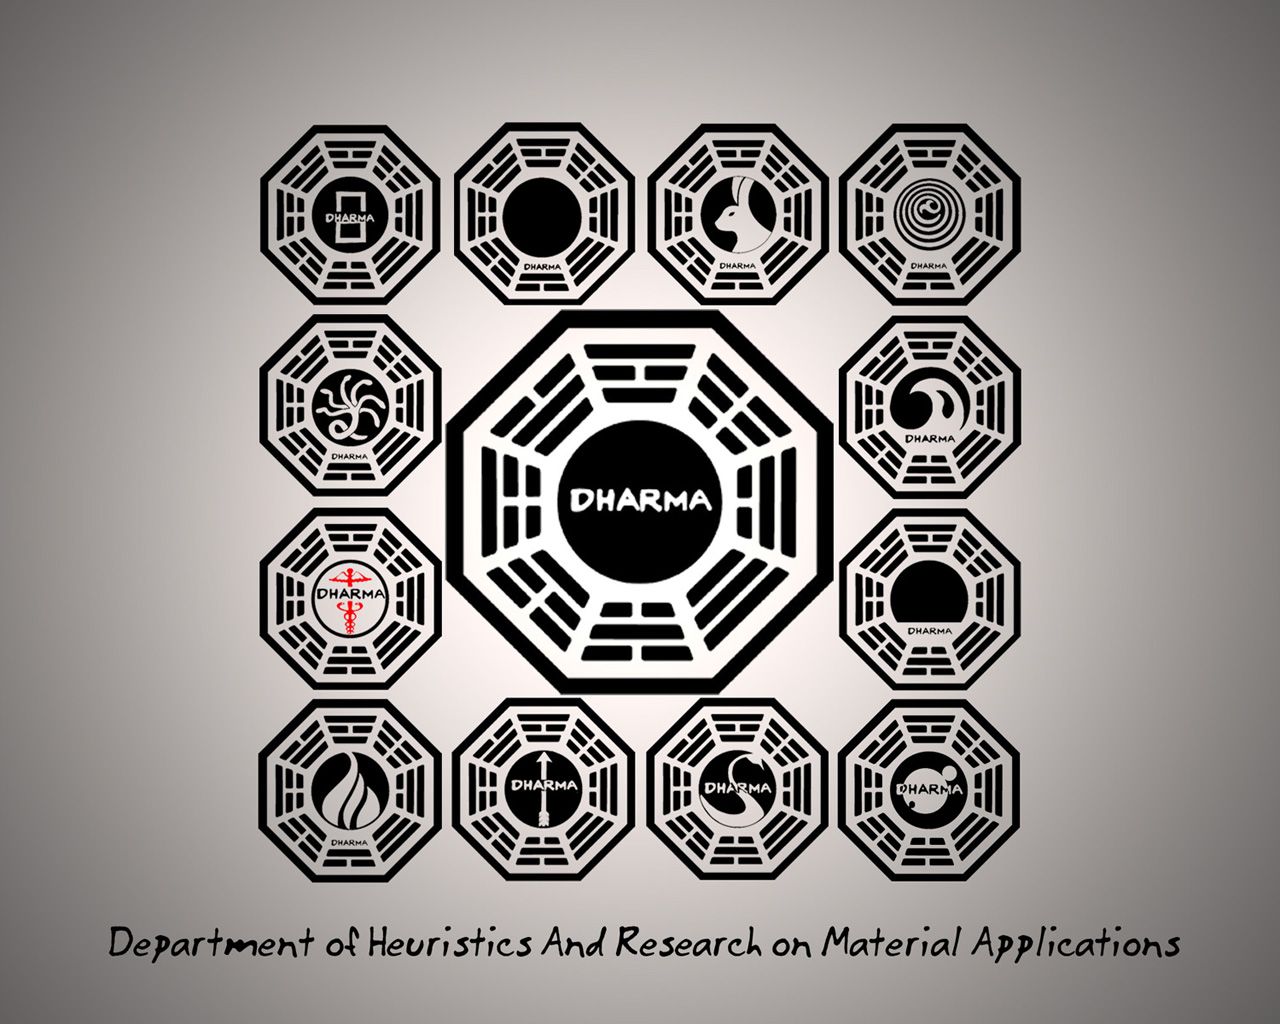 Dharma Stations 1280x1024 Wallpapers, 1280x1024 Wallpapers ...